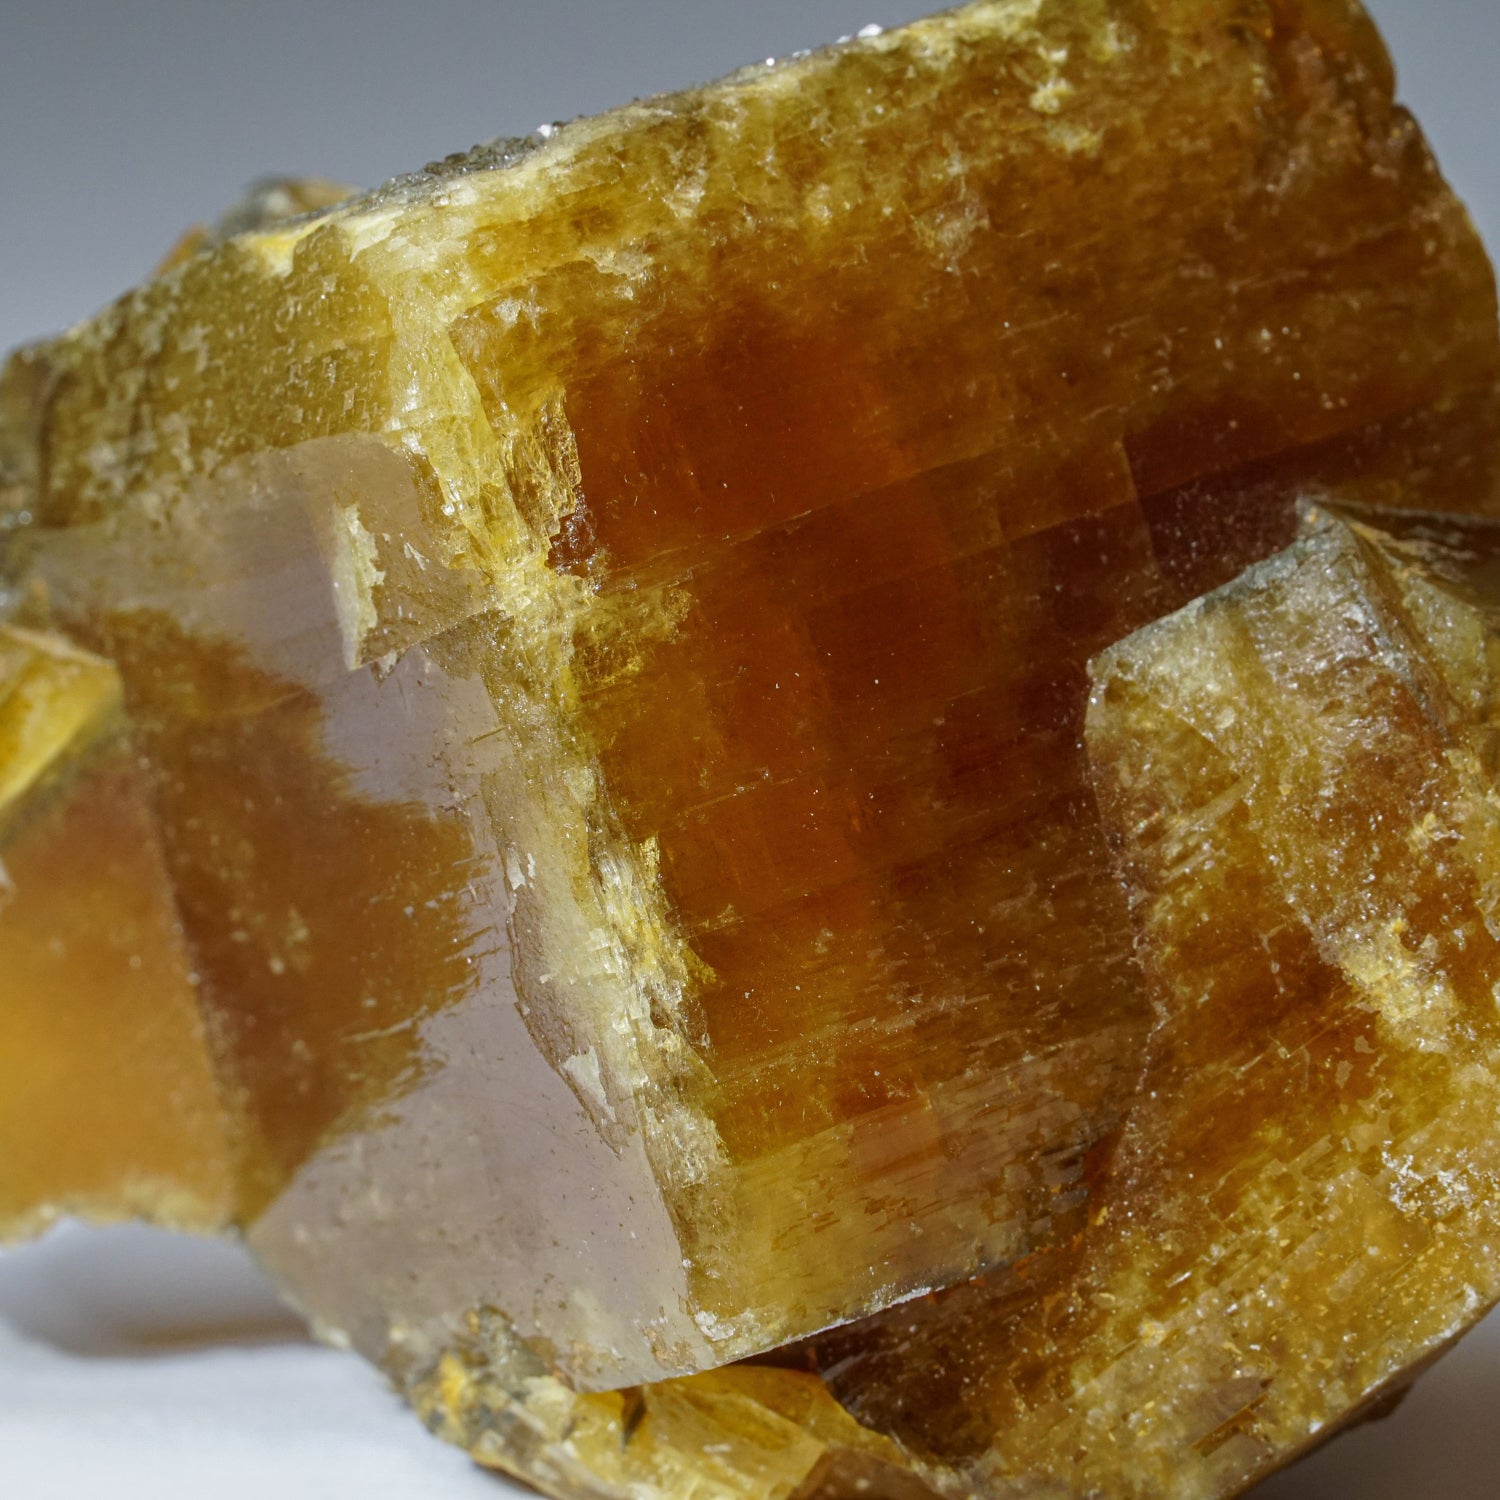 Golden Barite with Marcasite Crystals from Nandan County, Hechi, Guangxi, China.